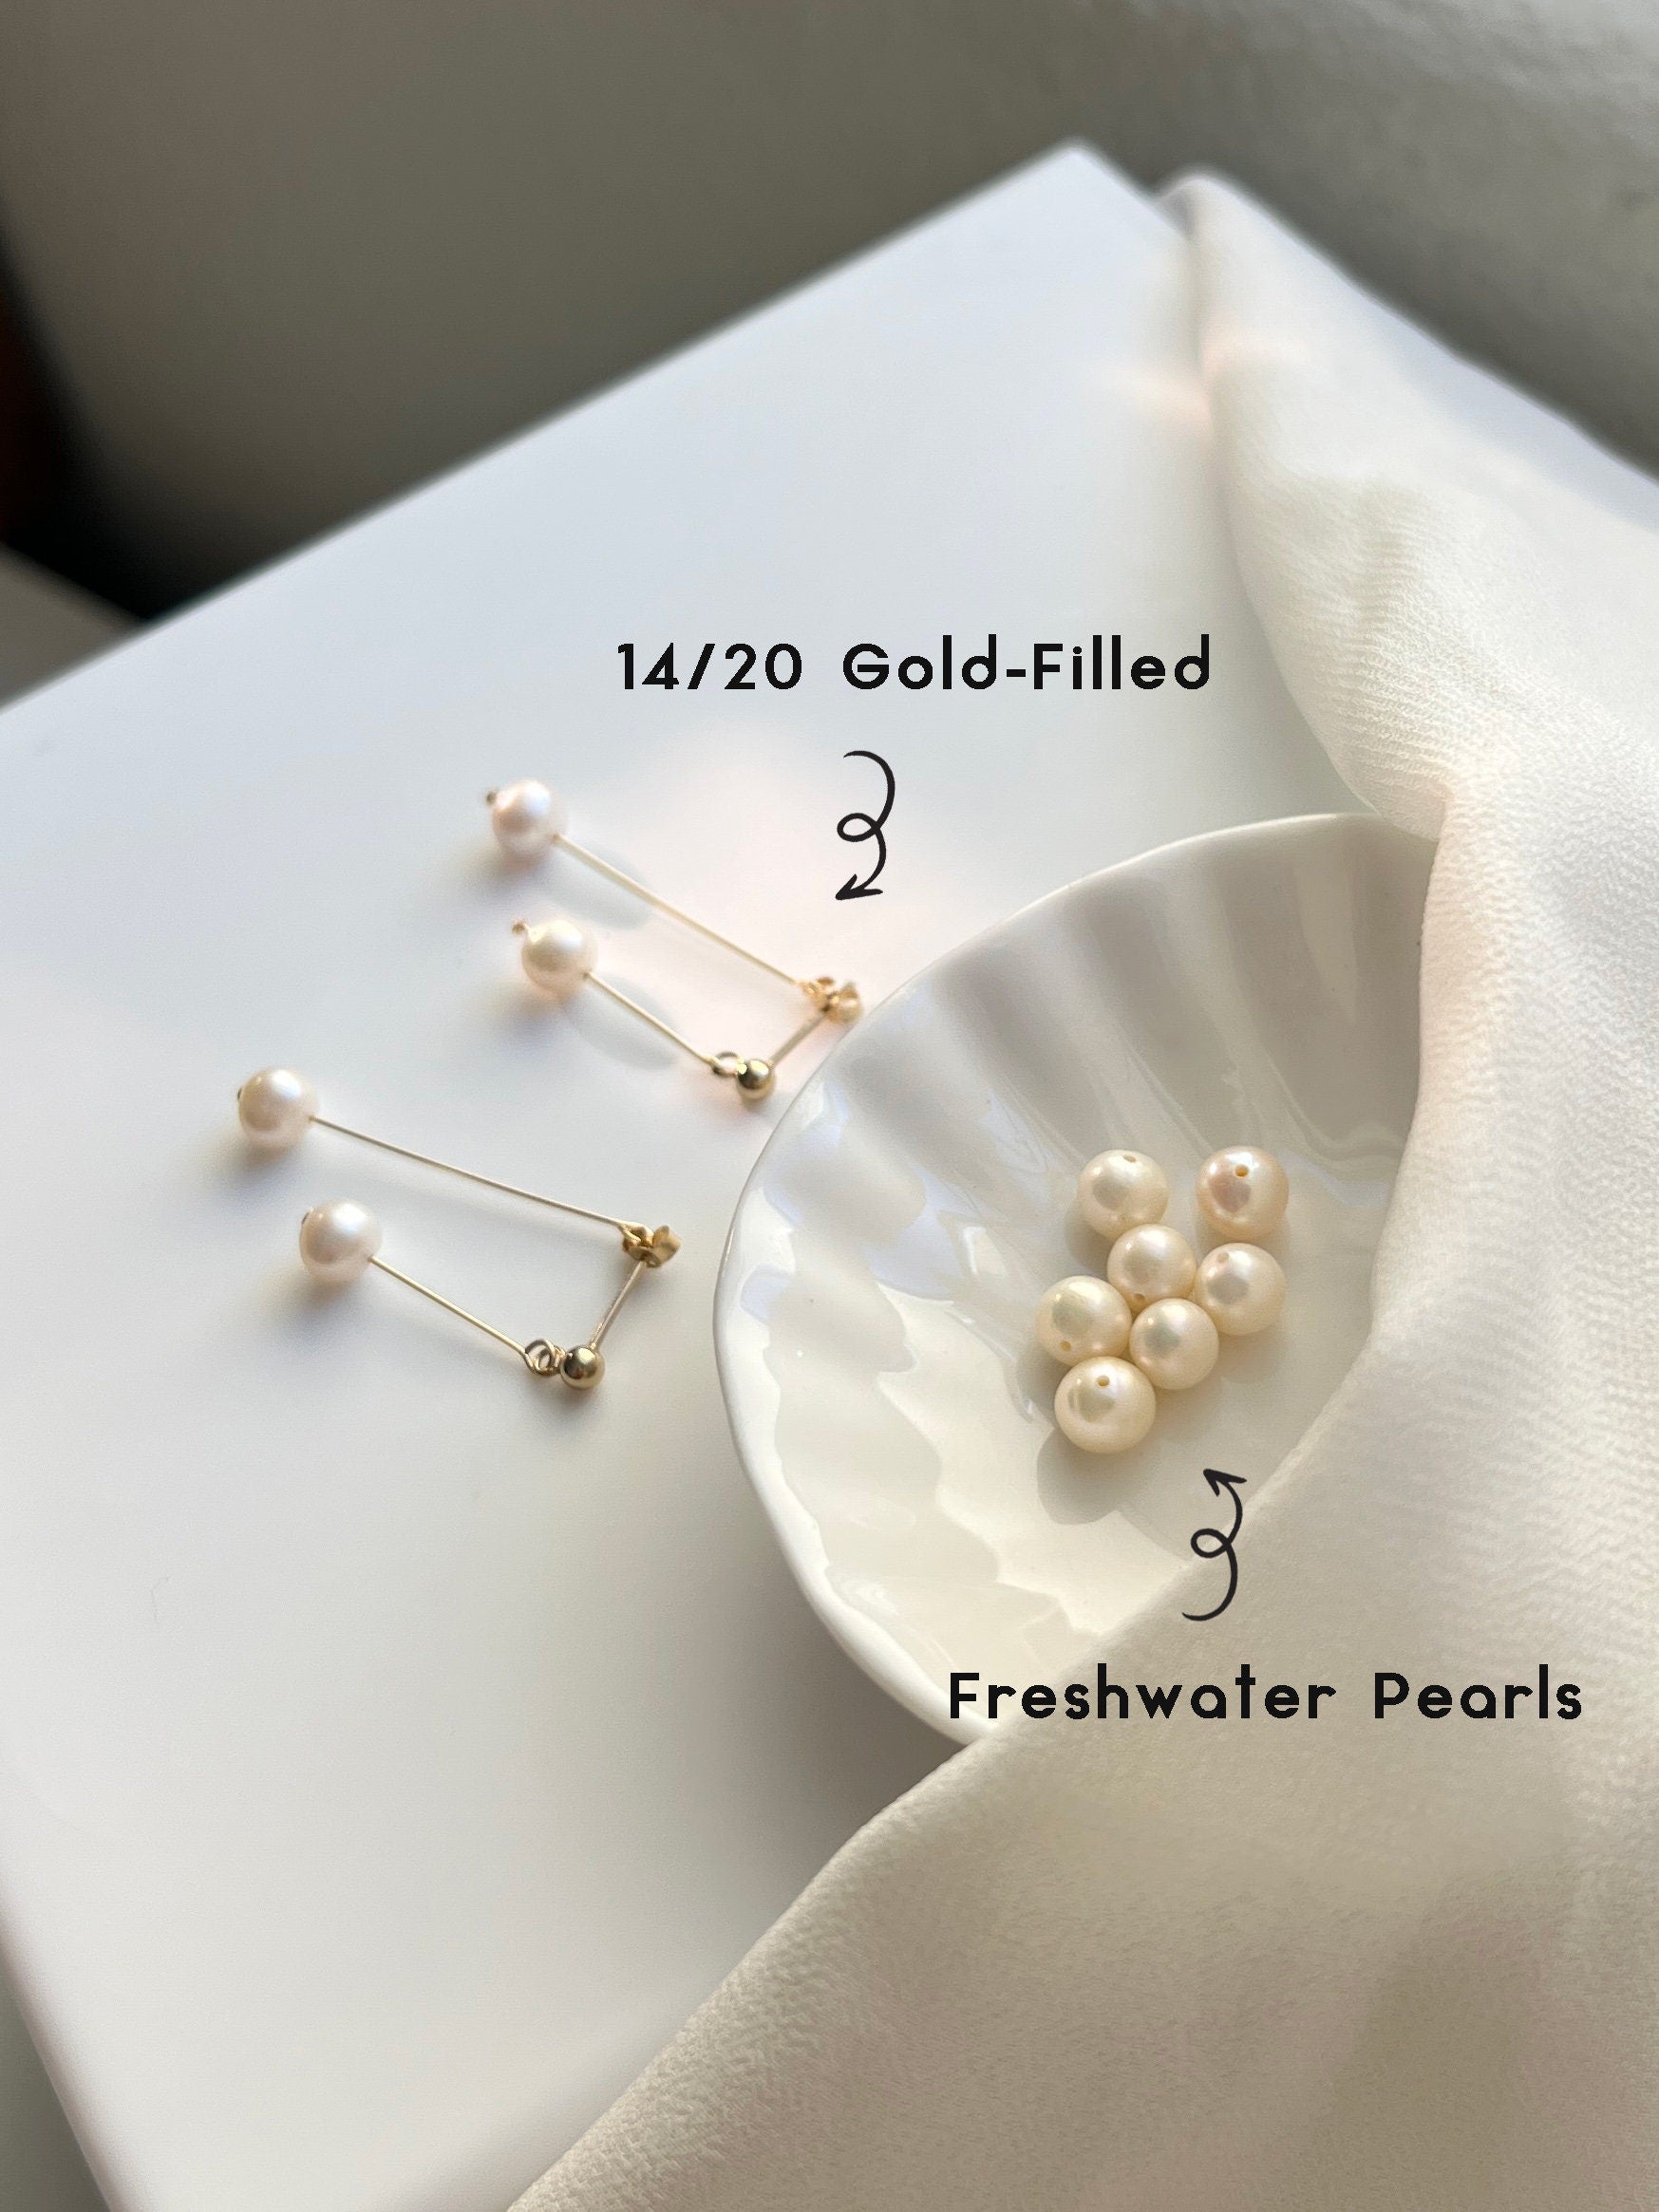 Amazon.com: Statement Earrings Natural Freshwater Pearl Earrings Fashion  Jewelry for Women Gifts Drop Dangle Earrings (Color : 01, Size Per Pearl :  12-13mm) (1 12b13mm) : Clothing, Shoes & Jewelry